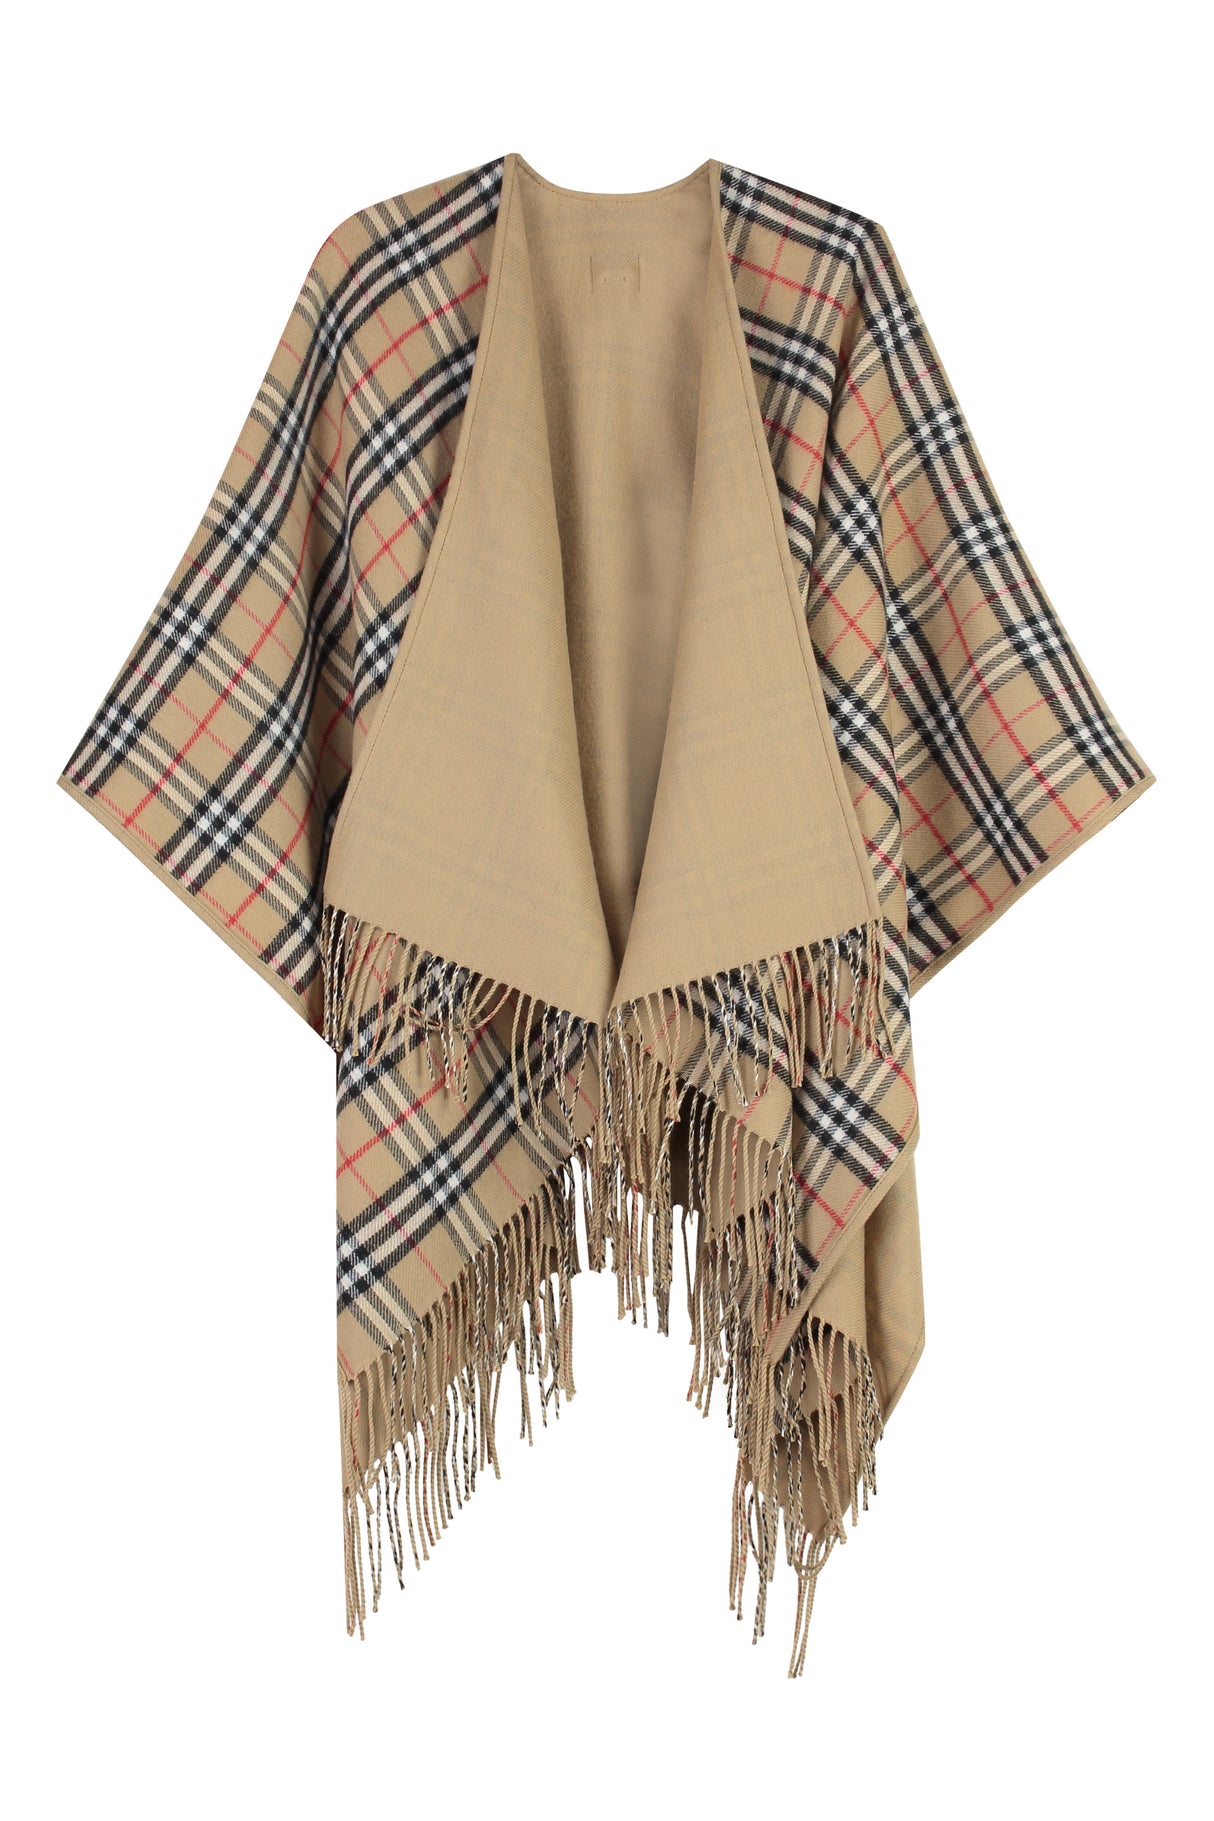 BURBERRY Women's Reversible Beige Wool Cape with Check Motif and Frayed Hem